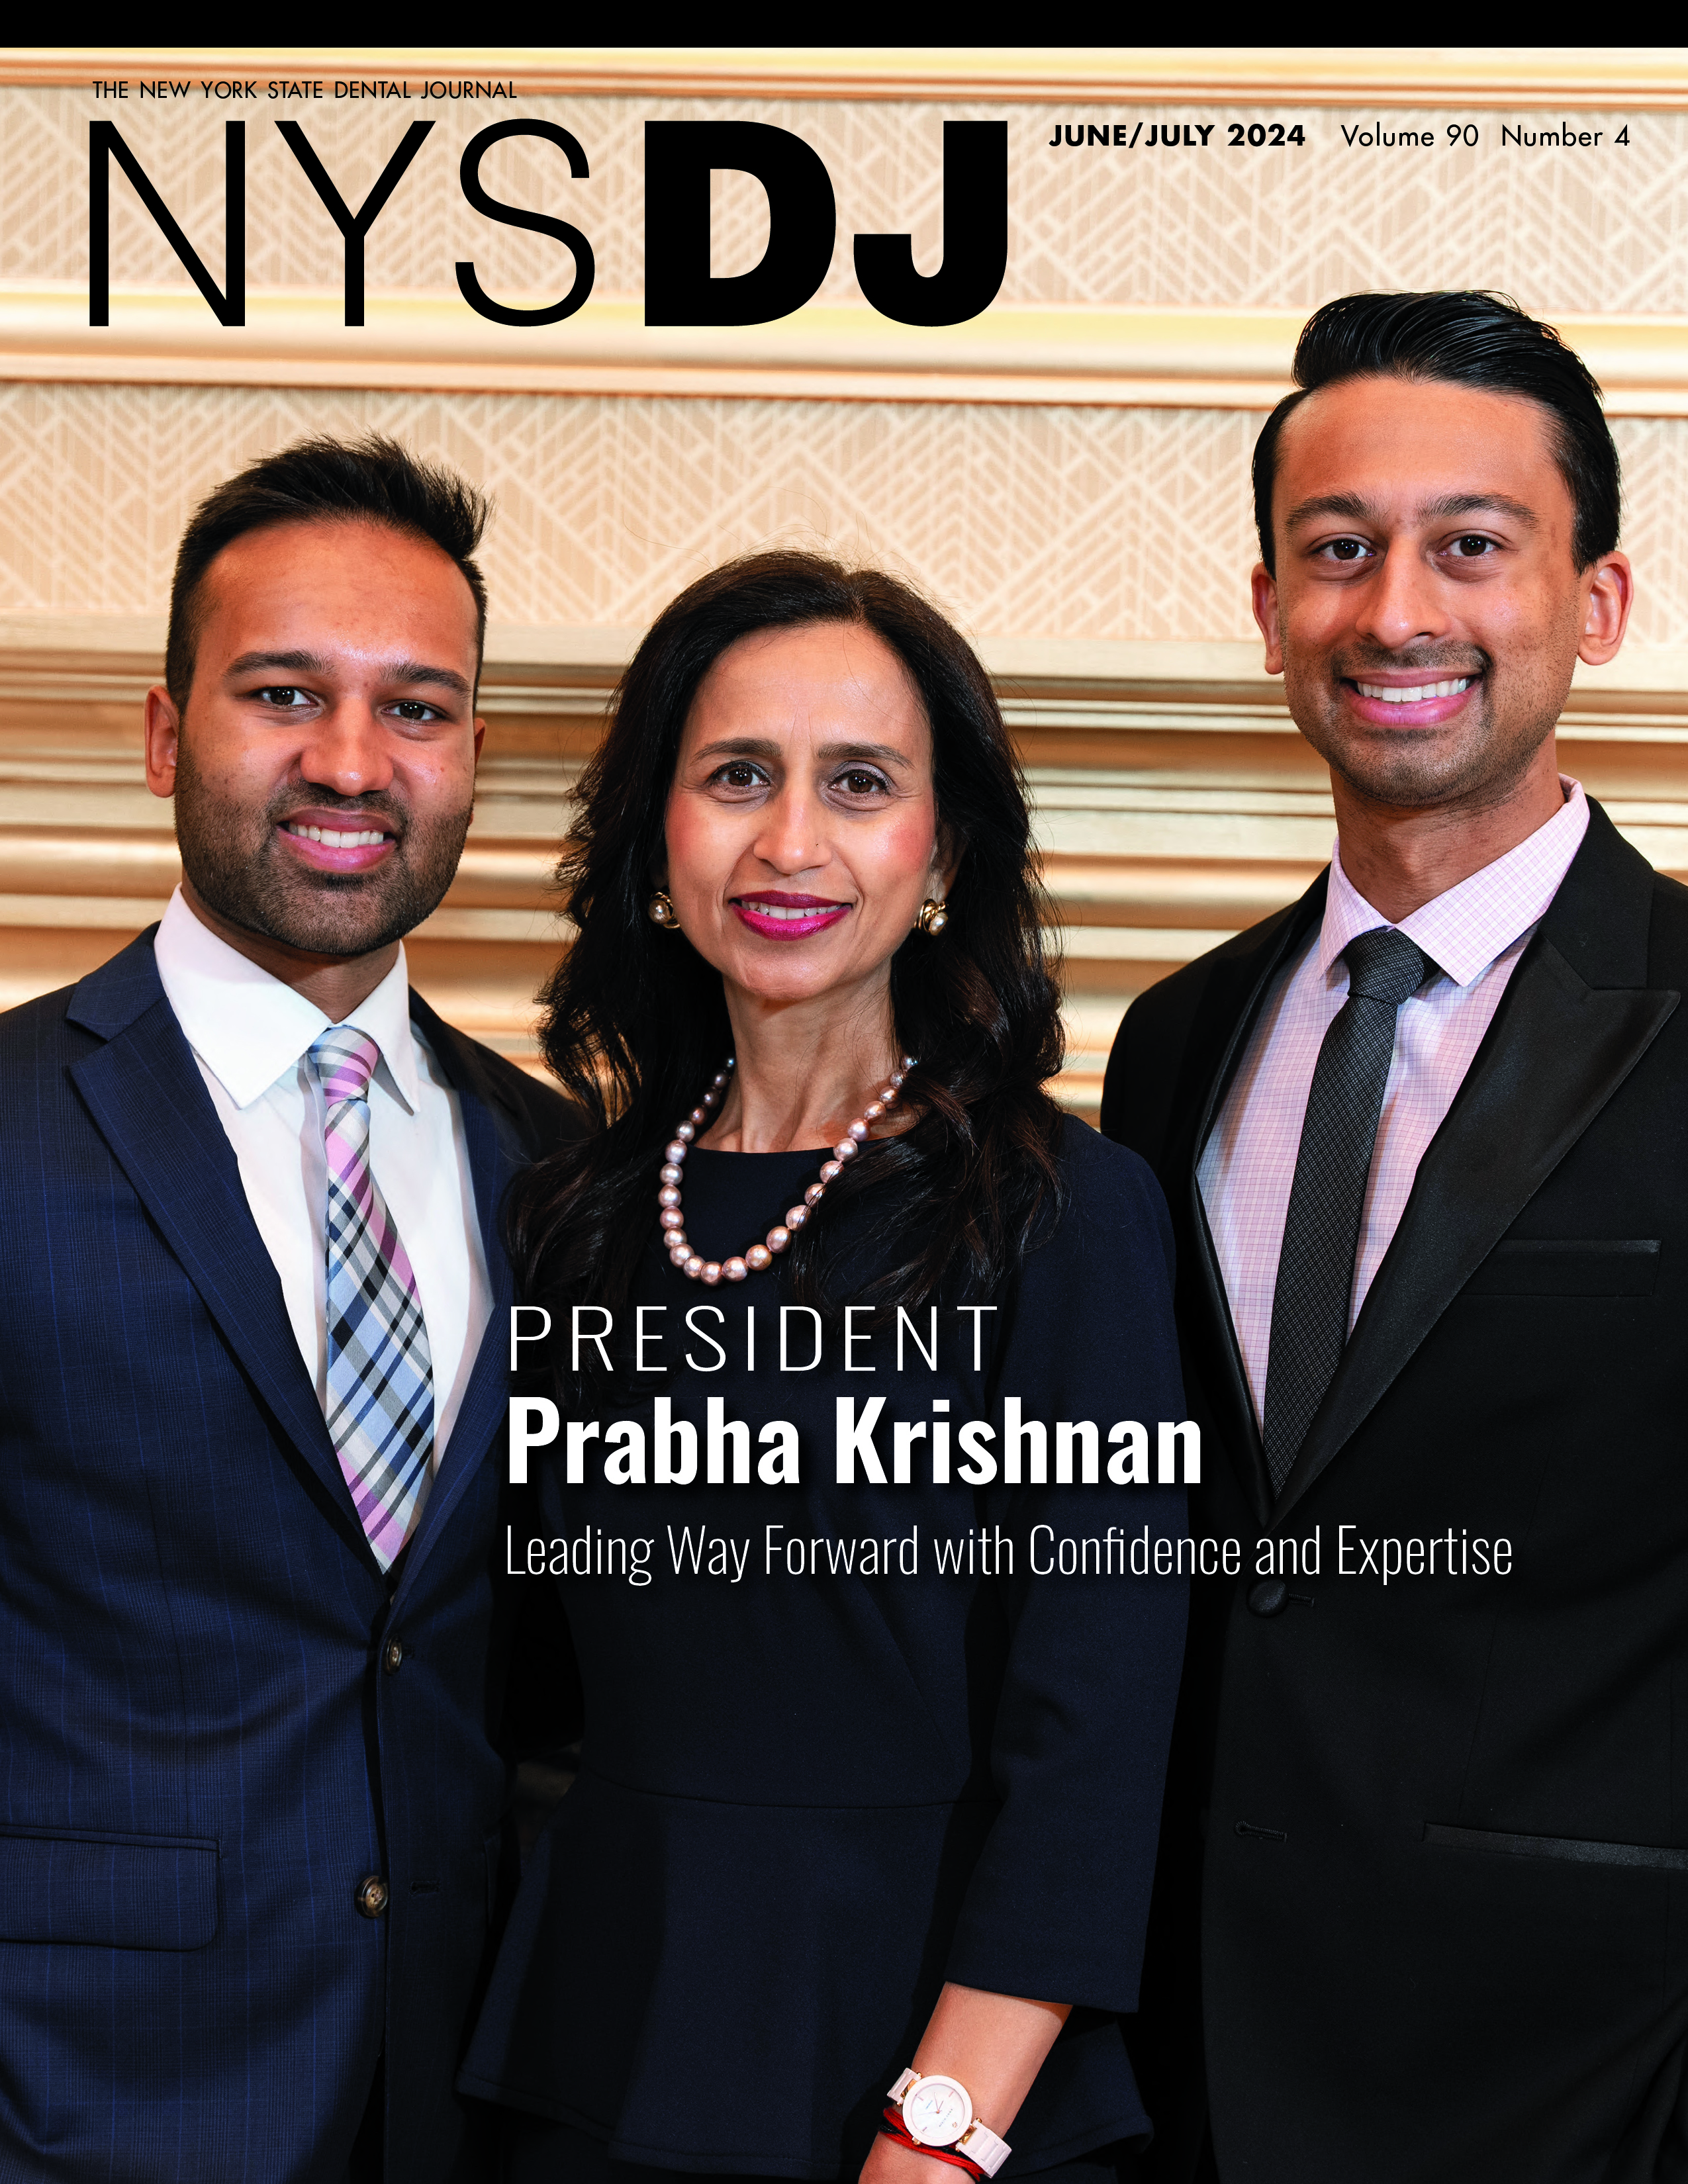 Cover of the NYSDJ with three adults dressing in business attire smiling and looking directly at the camera..